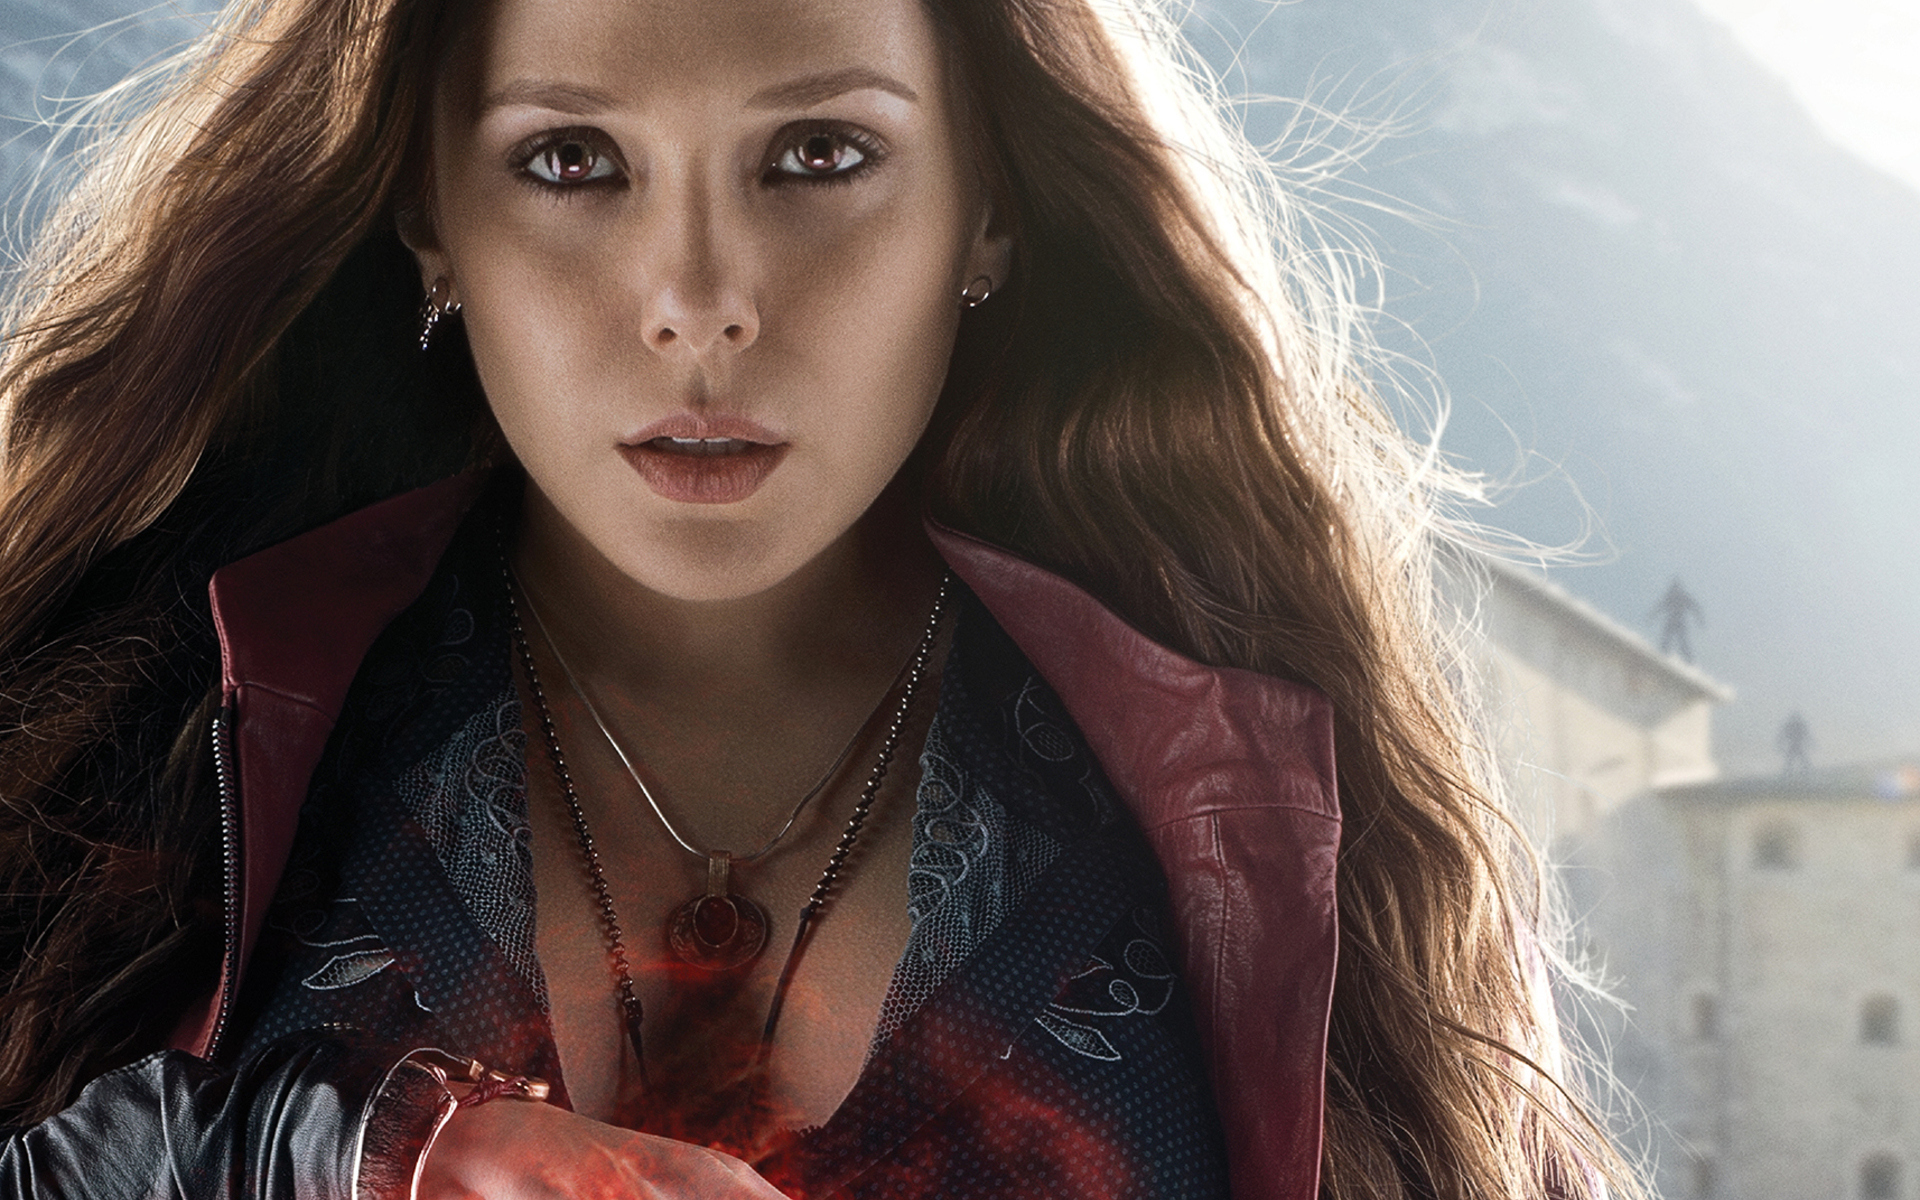 avengers, elizabeth olsen, long hair, magic, earrings, movie, avengers: age of ultron, necklace, red eyes, redhead, scarlet witch, the avengers cellphone